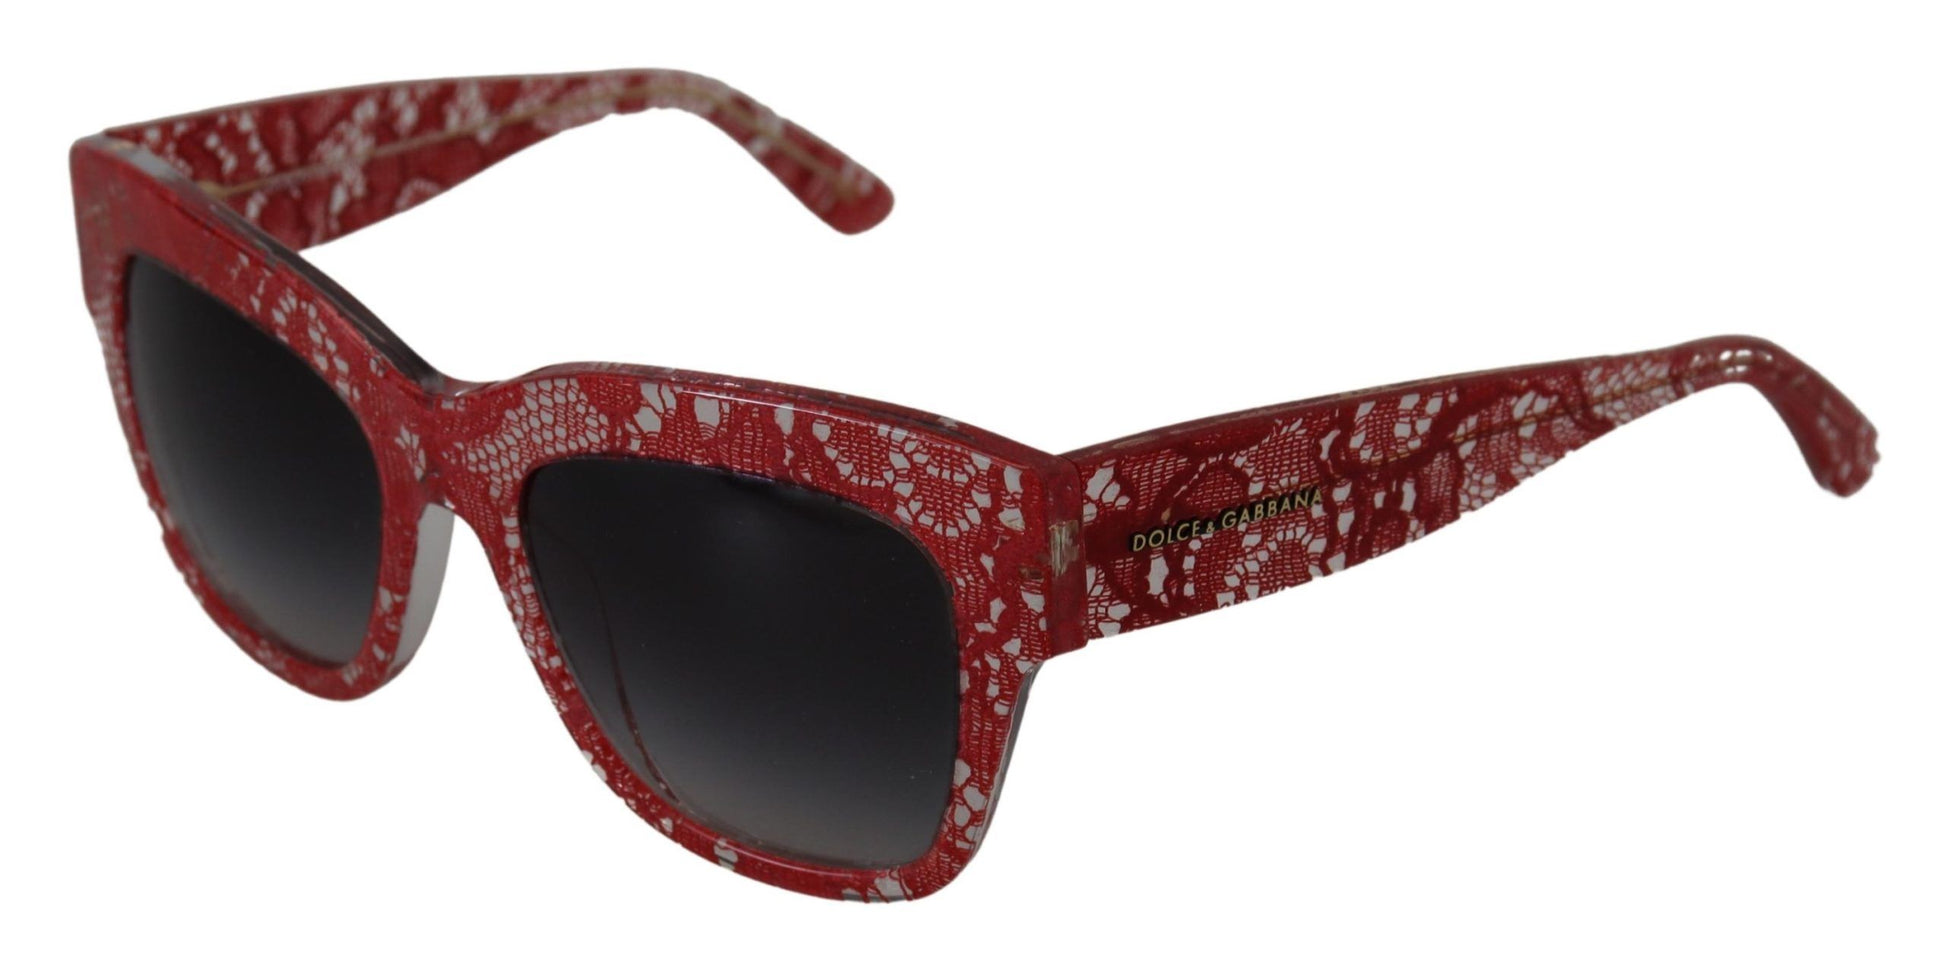 Elegant Lace-Infused Red Sunglasses